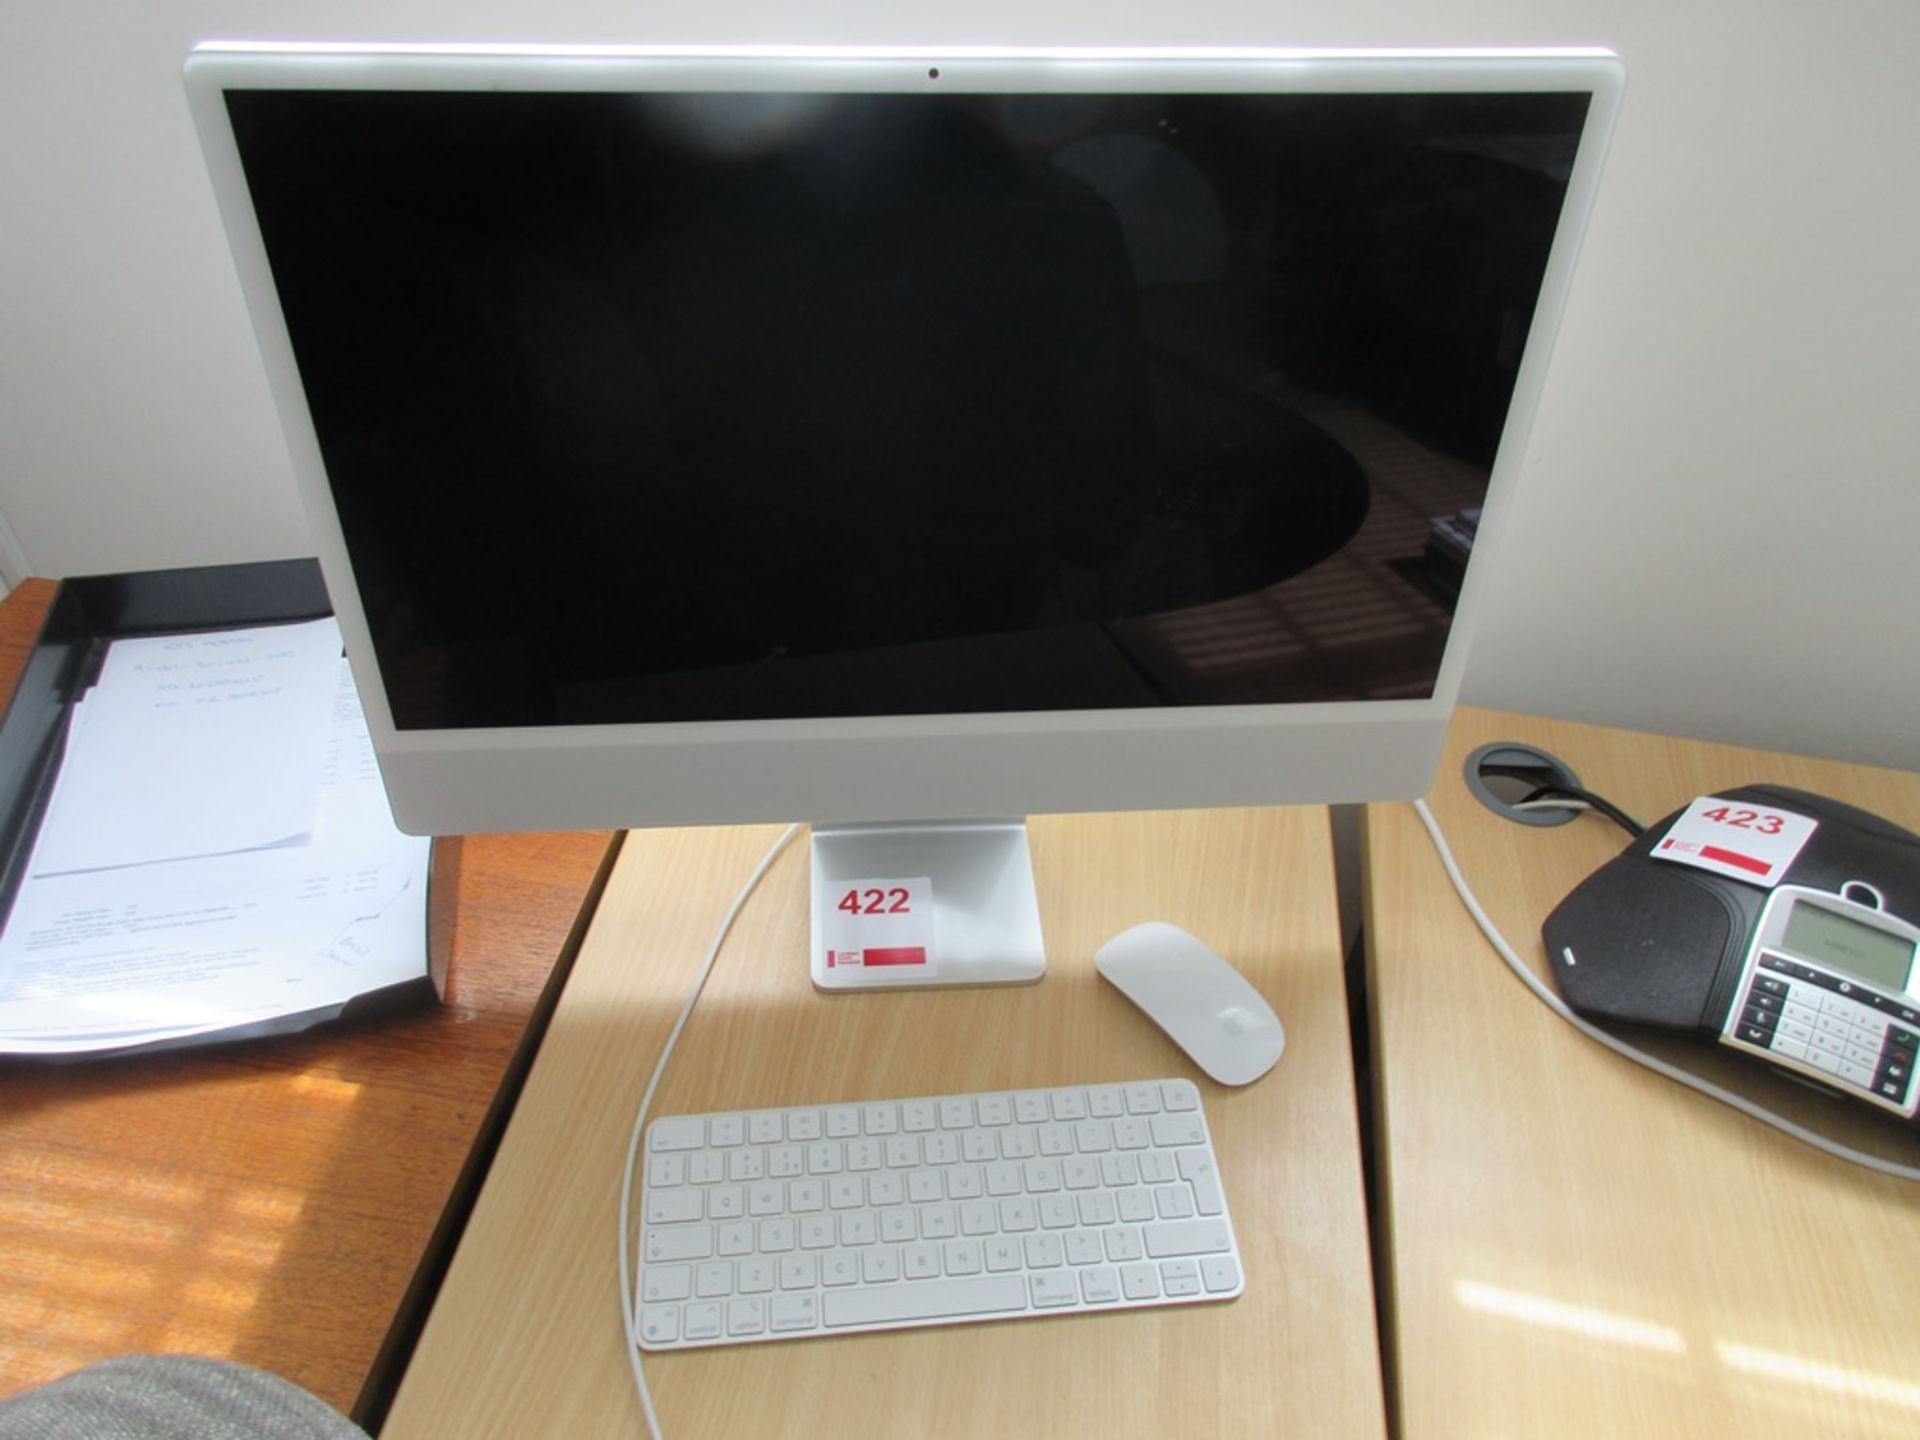 Apple iMac with keyboard, mouse